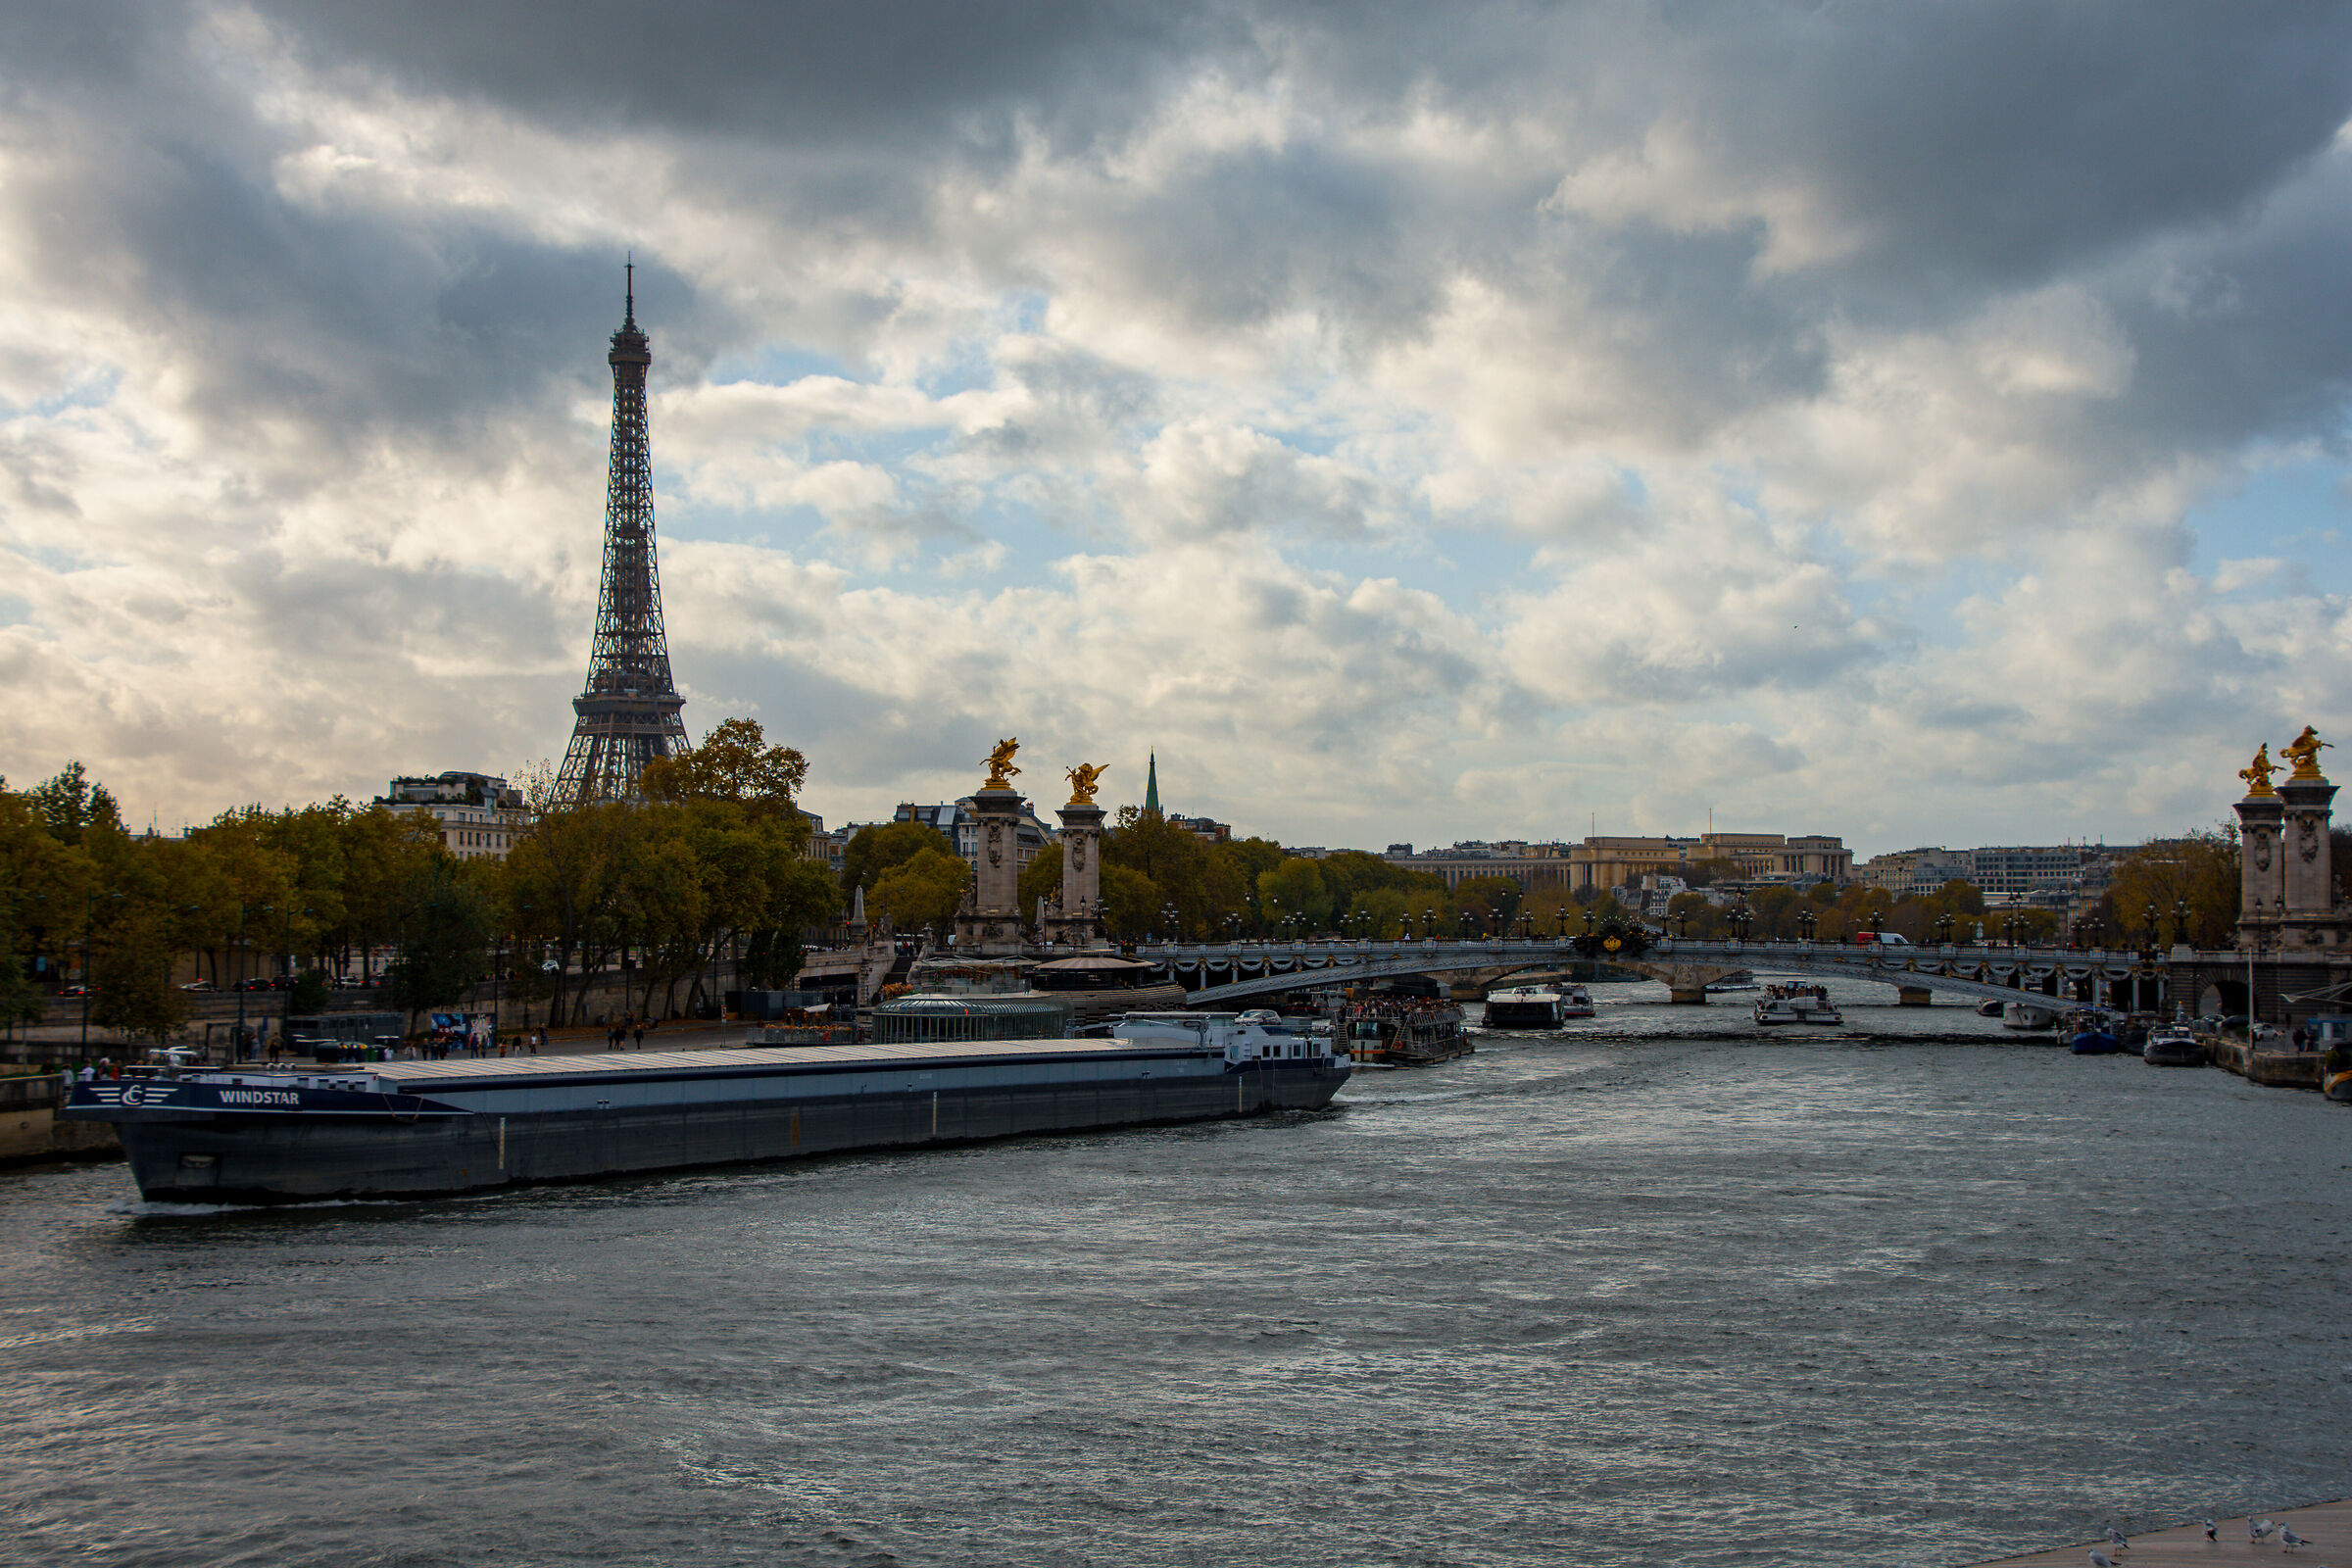 The Seine on a November day ...